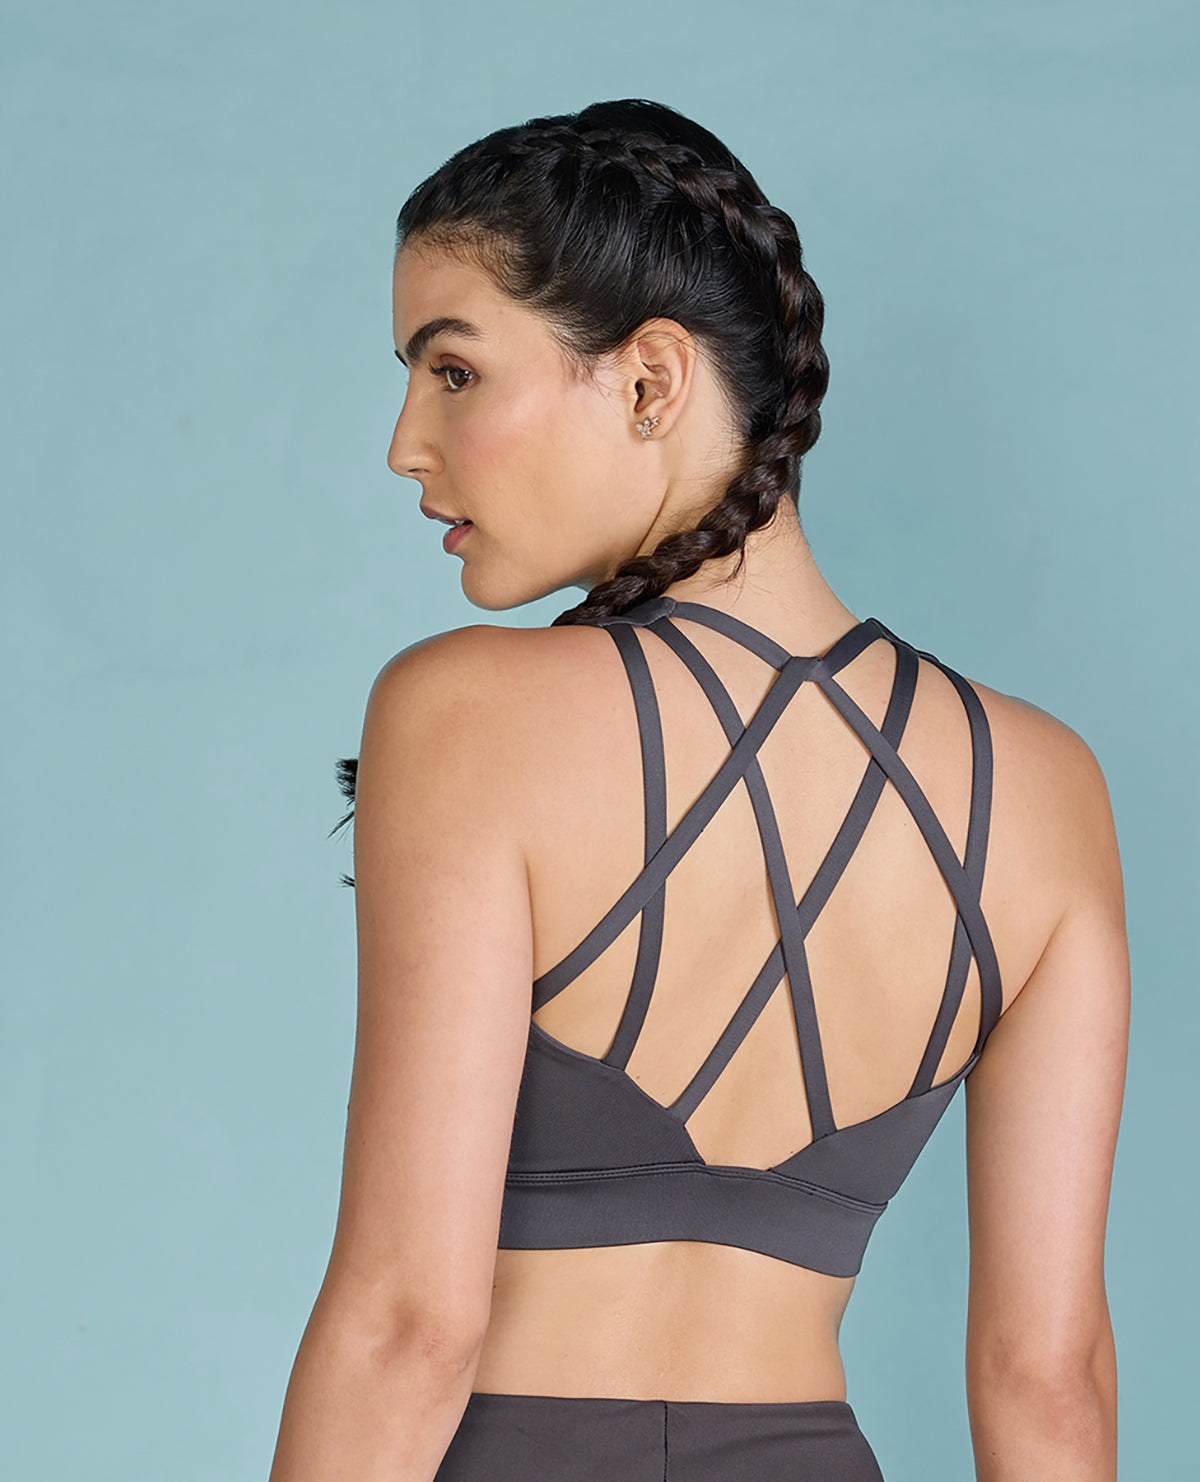 Buy Kica Built In Cups Sports Bra With Sweat Wicking Fabric online